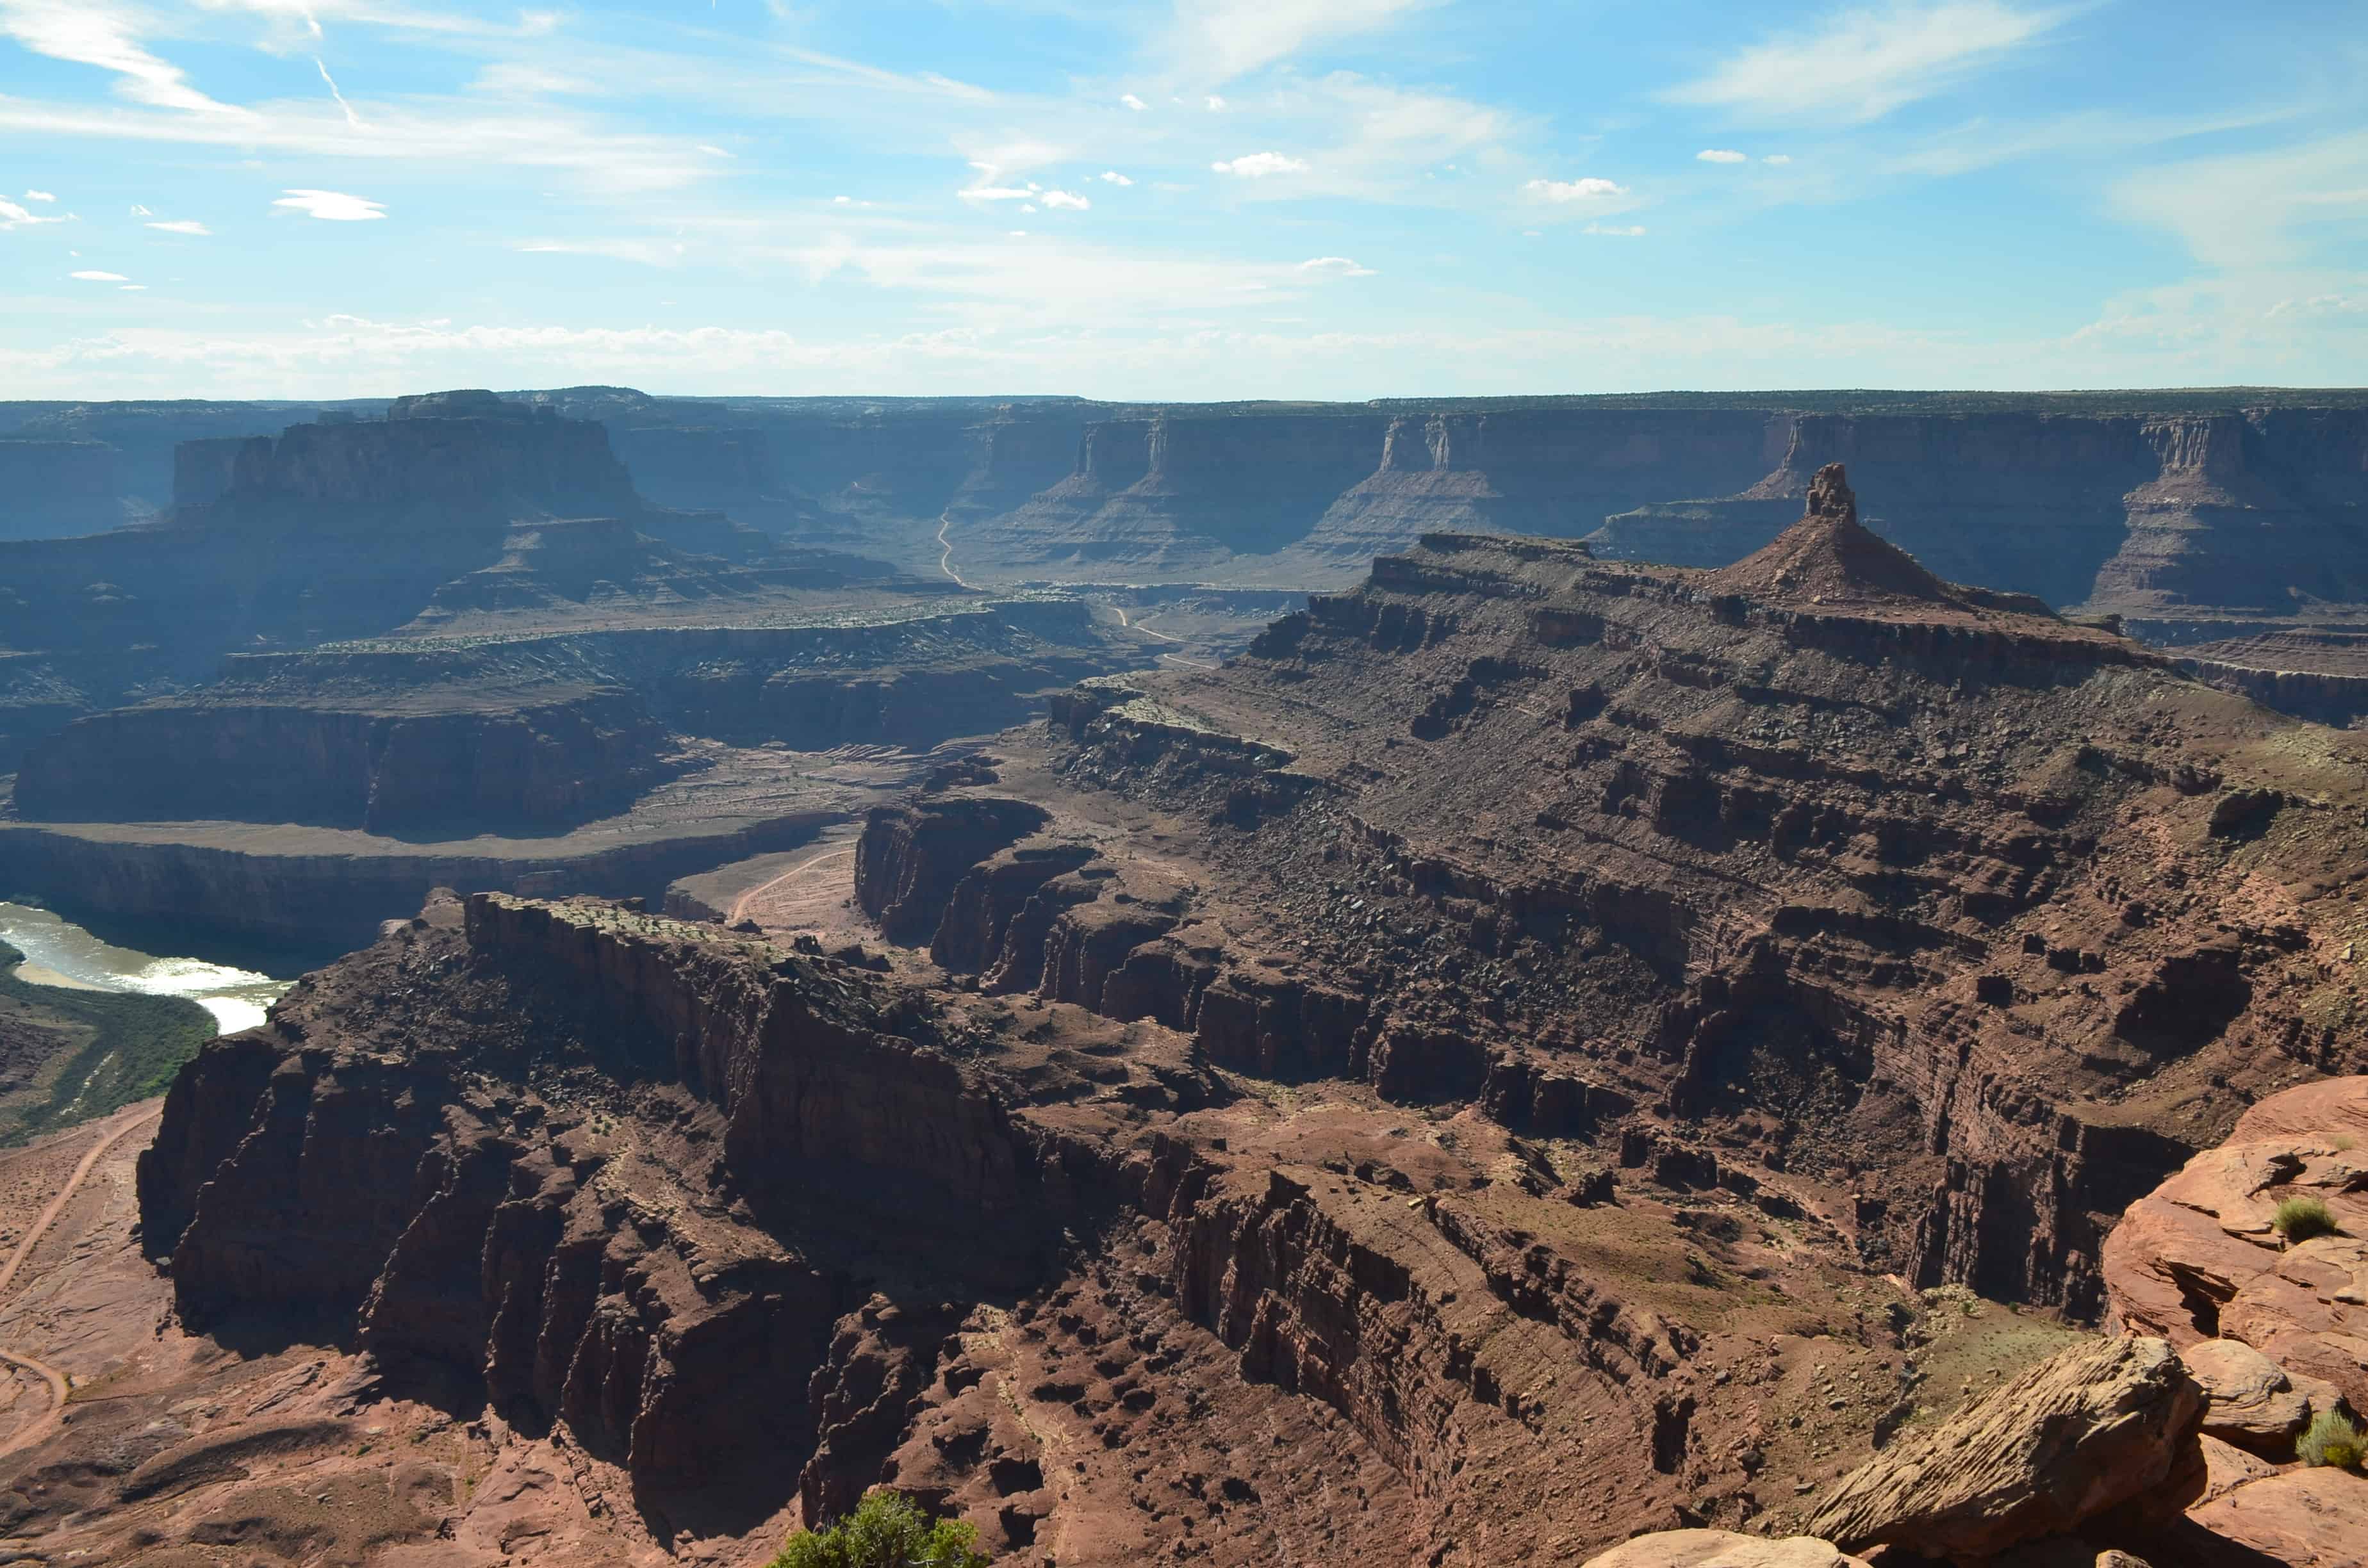 Looking southwest at Dead Horse Point at Dead Horse Point State Park in Utah